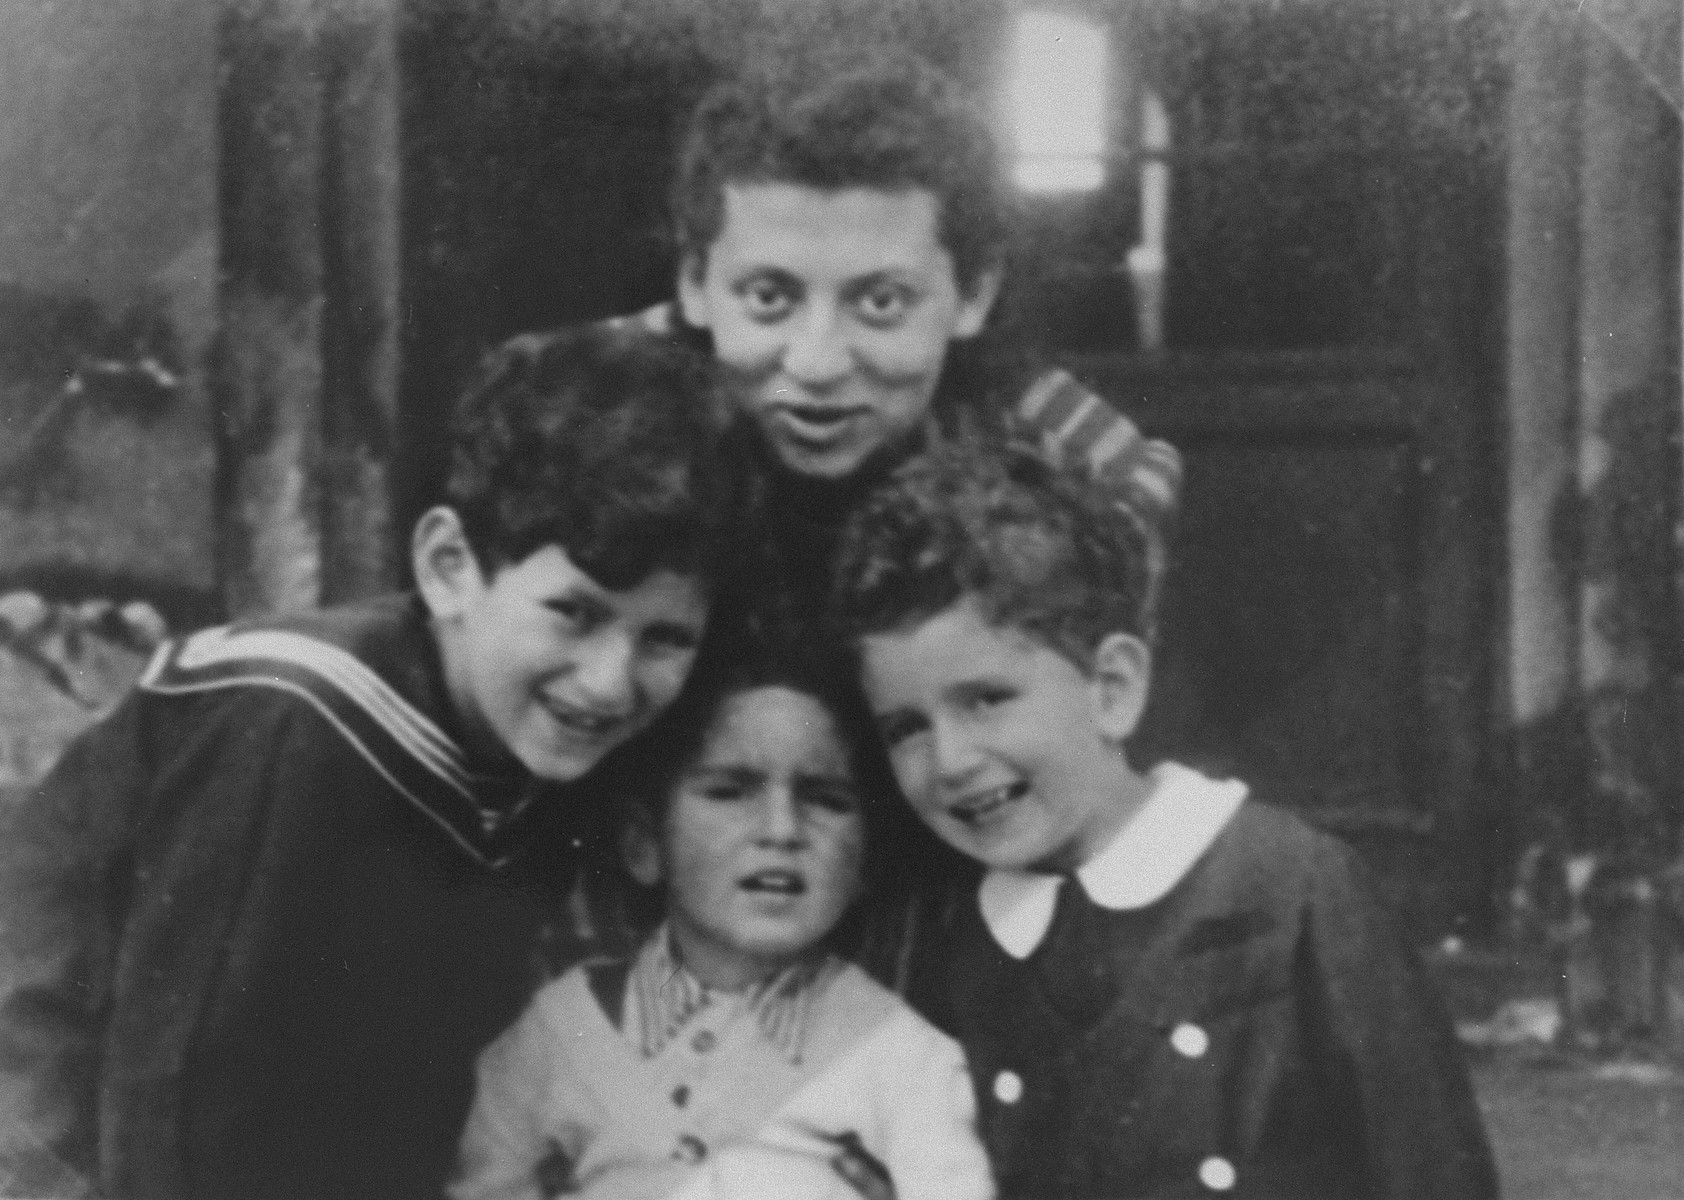 The three Gutgeld children pose with their aunt in the Warsaw Ghetto, prior to their being placed in hiding with Alex and Mela Roslan. 

Pictured are Jacob, David and Shalom Gutgeld with their Aunt Janke.